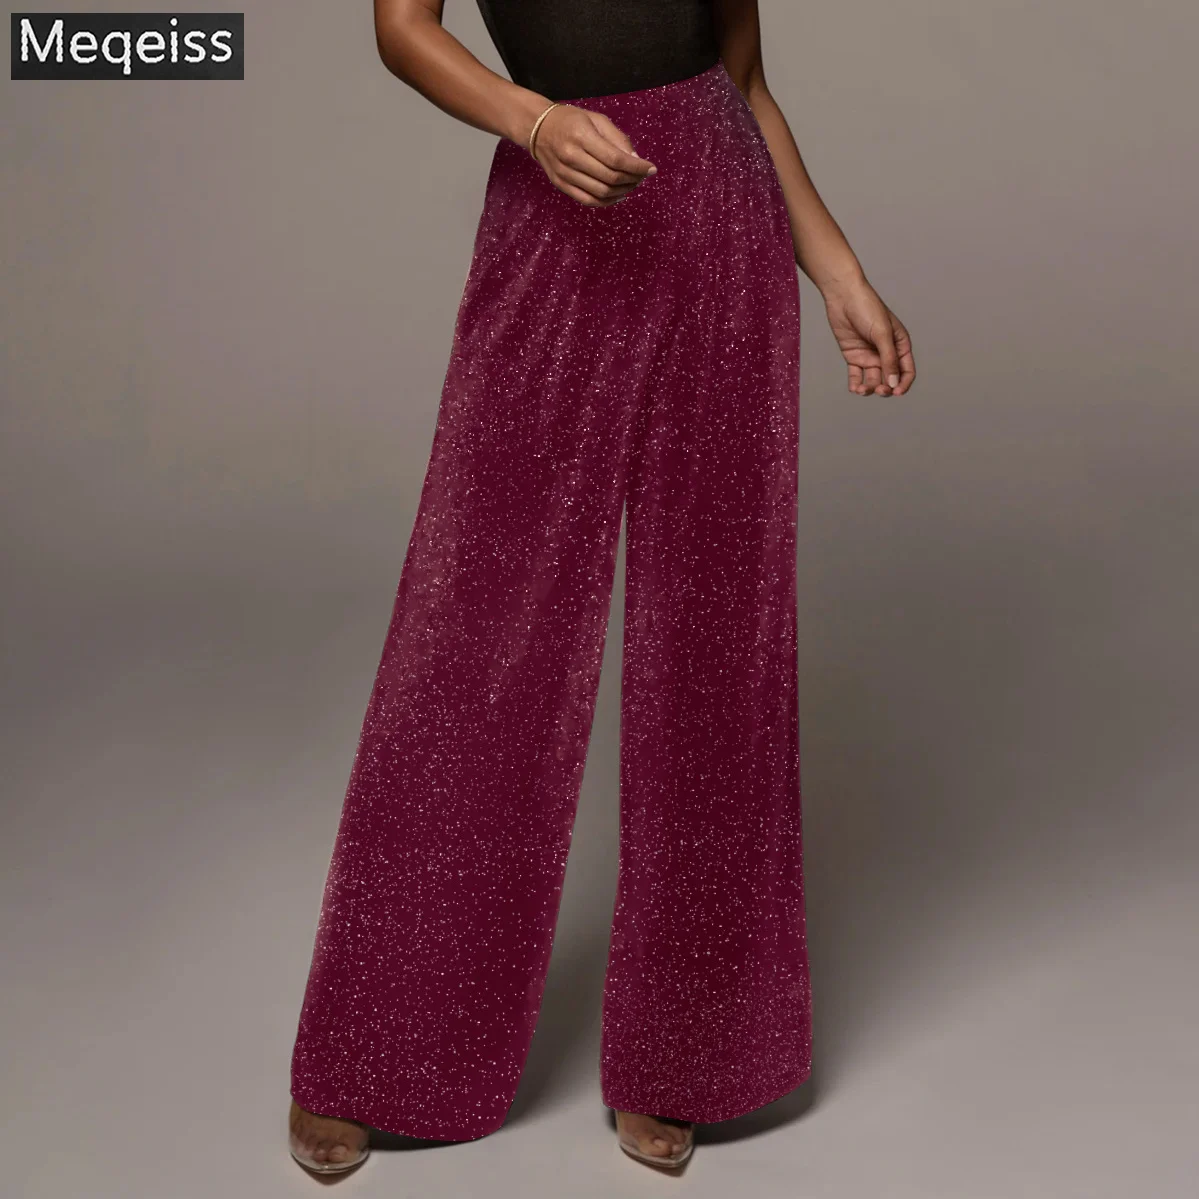 Meqeiss Shinny Trousers Blingbling Button Long Pants Wide Leg Suit Pants Casual Office Ladies Silver Formal Trousers Urban Pant